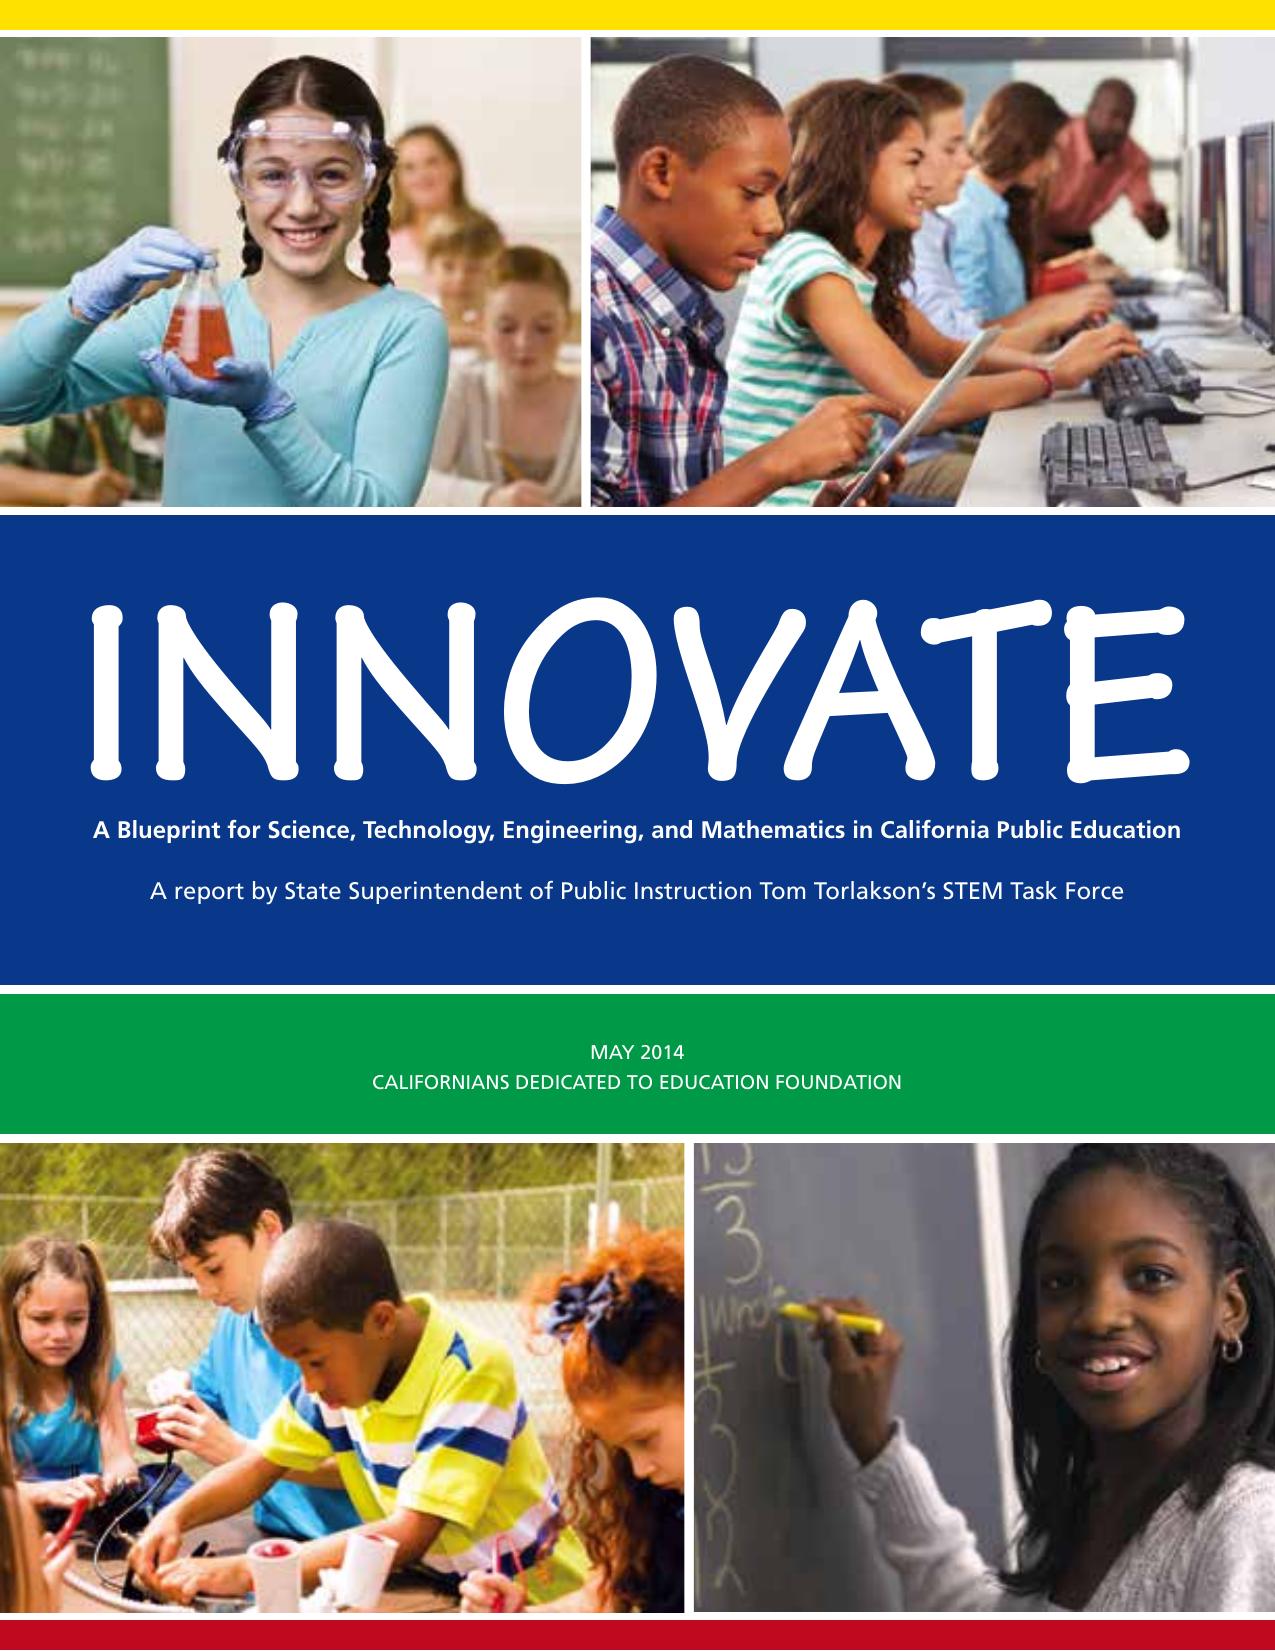 Innovate A Blueprint for STEM Education - Science (CA Dept of Education)